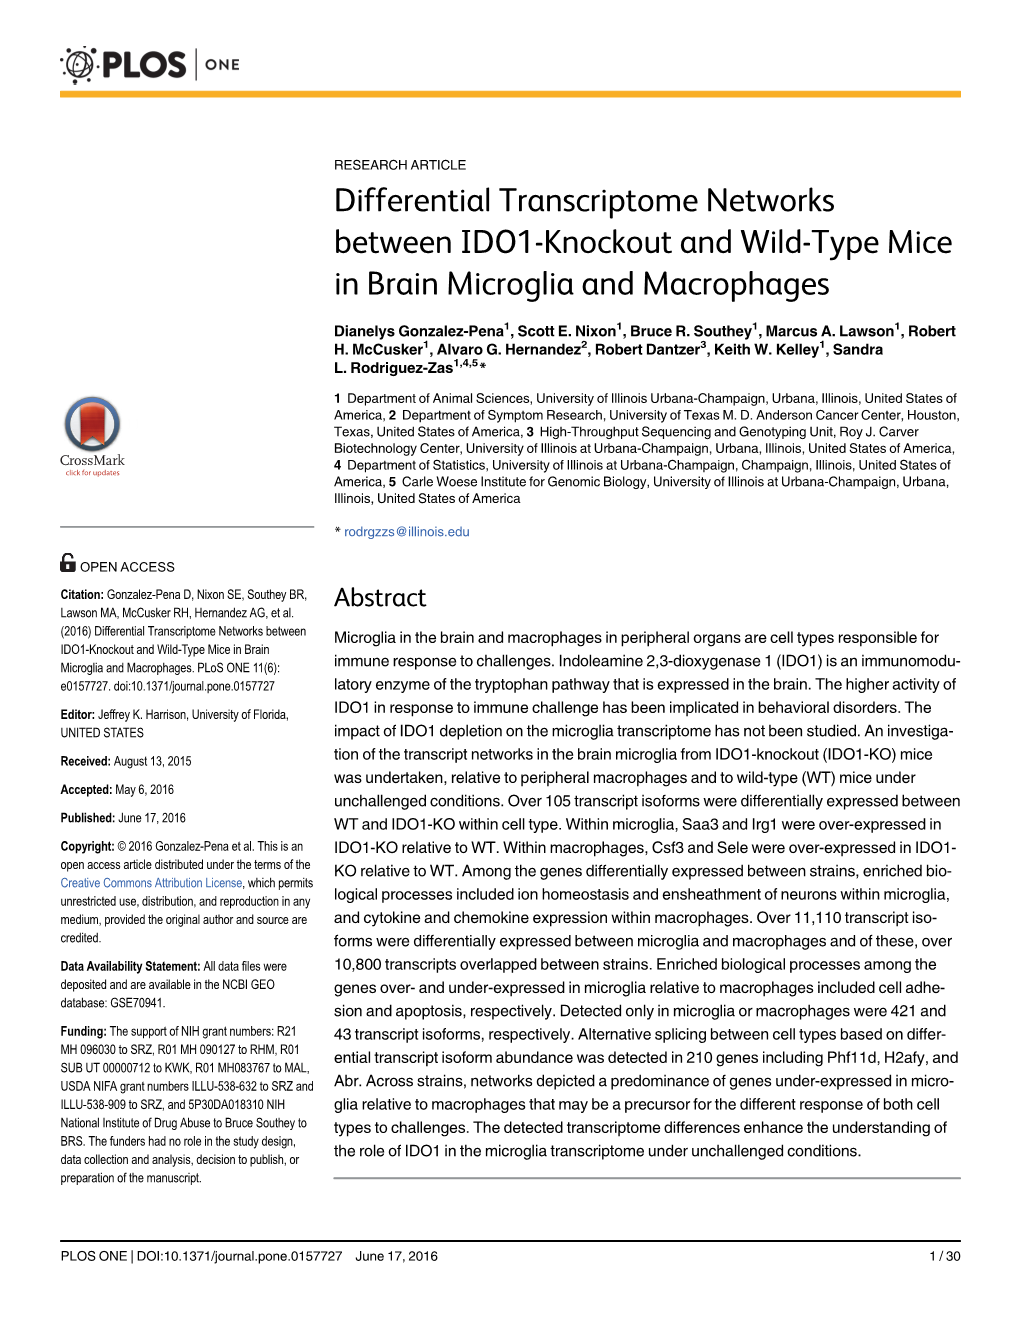 Differential Transcriptome Networks Between IDO1-Knockout and Wild-Type Mice in Brain Microglia and Macrophages